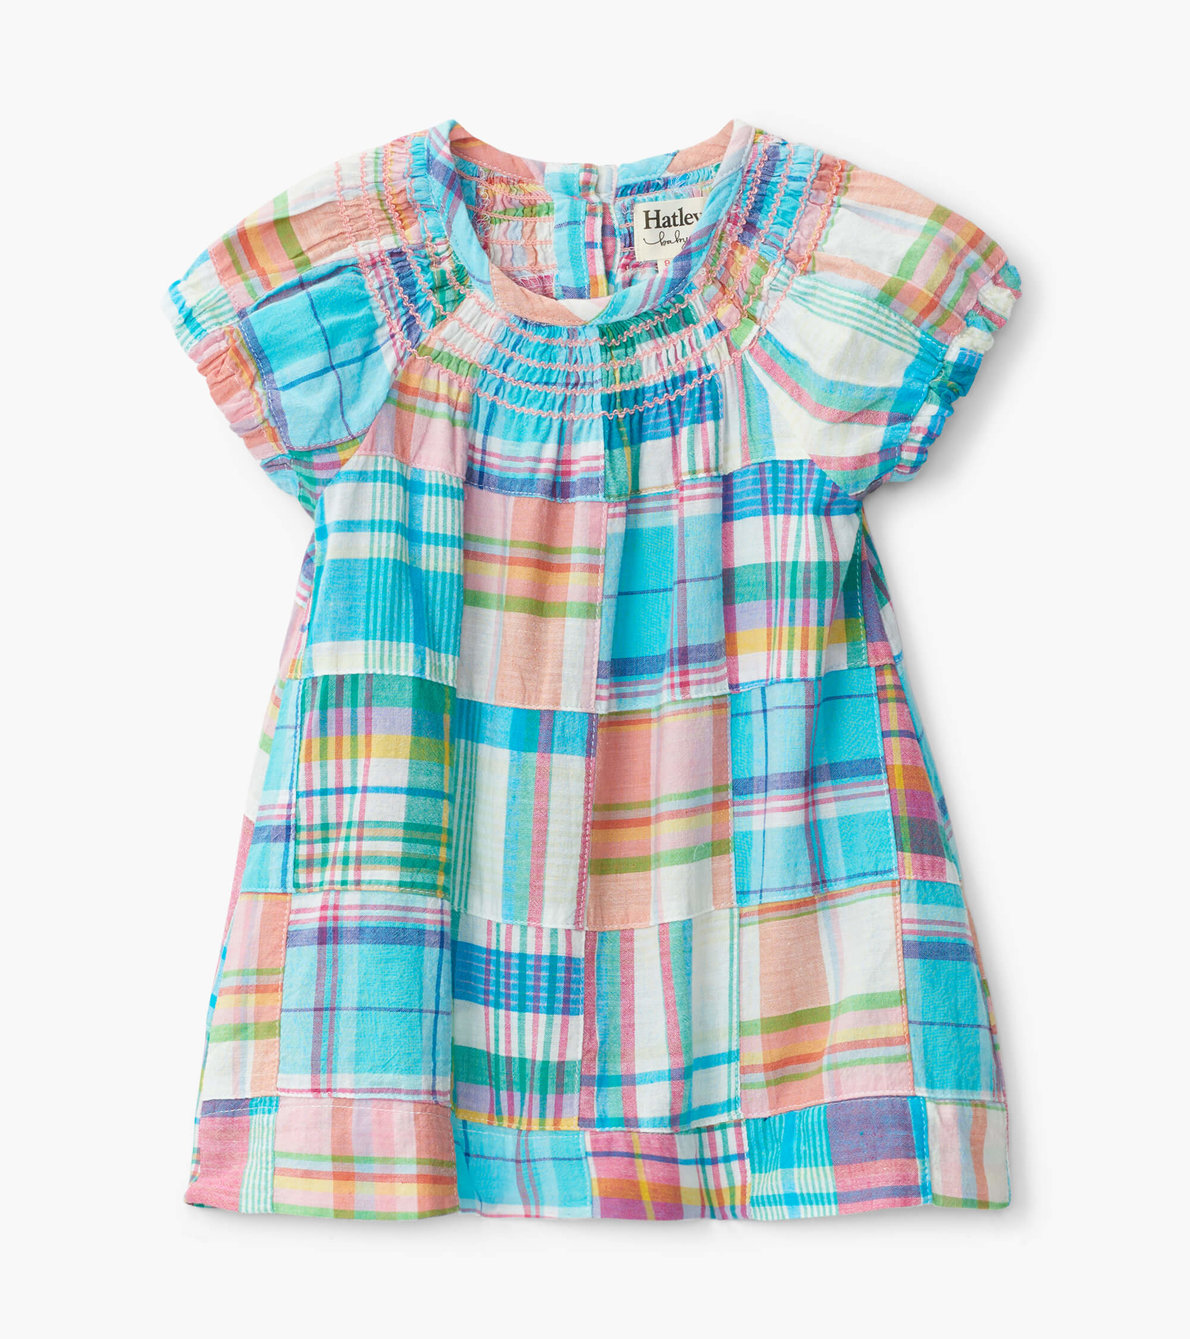 View larger image of Madras Plaid Baby Smocked Dress